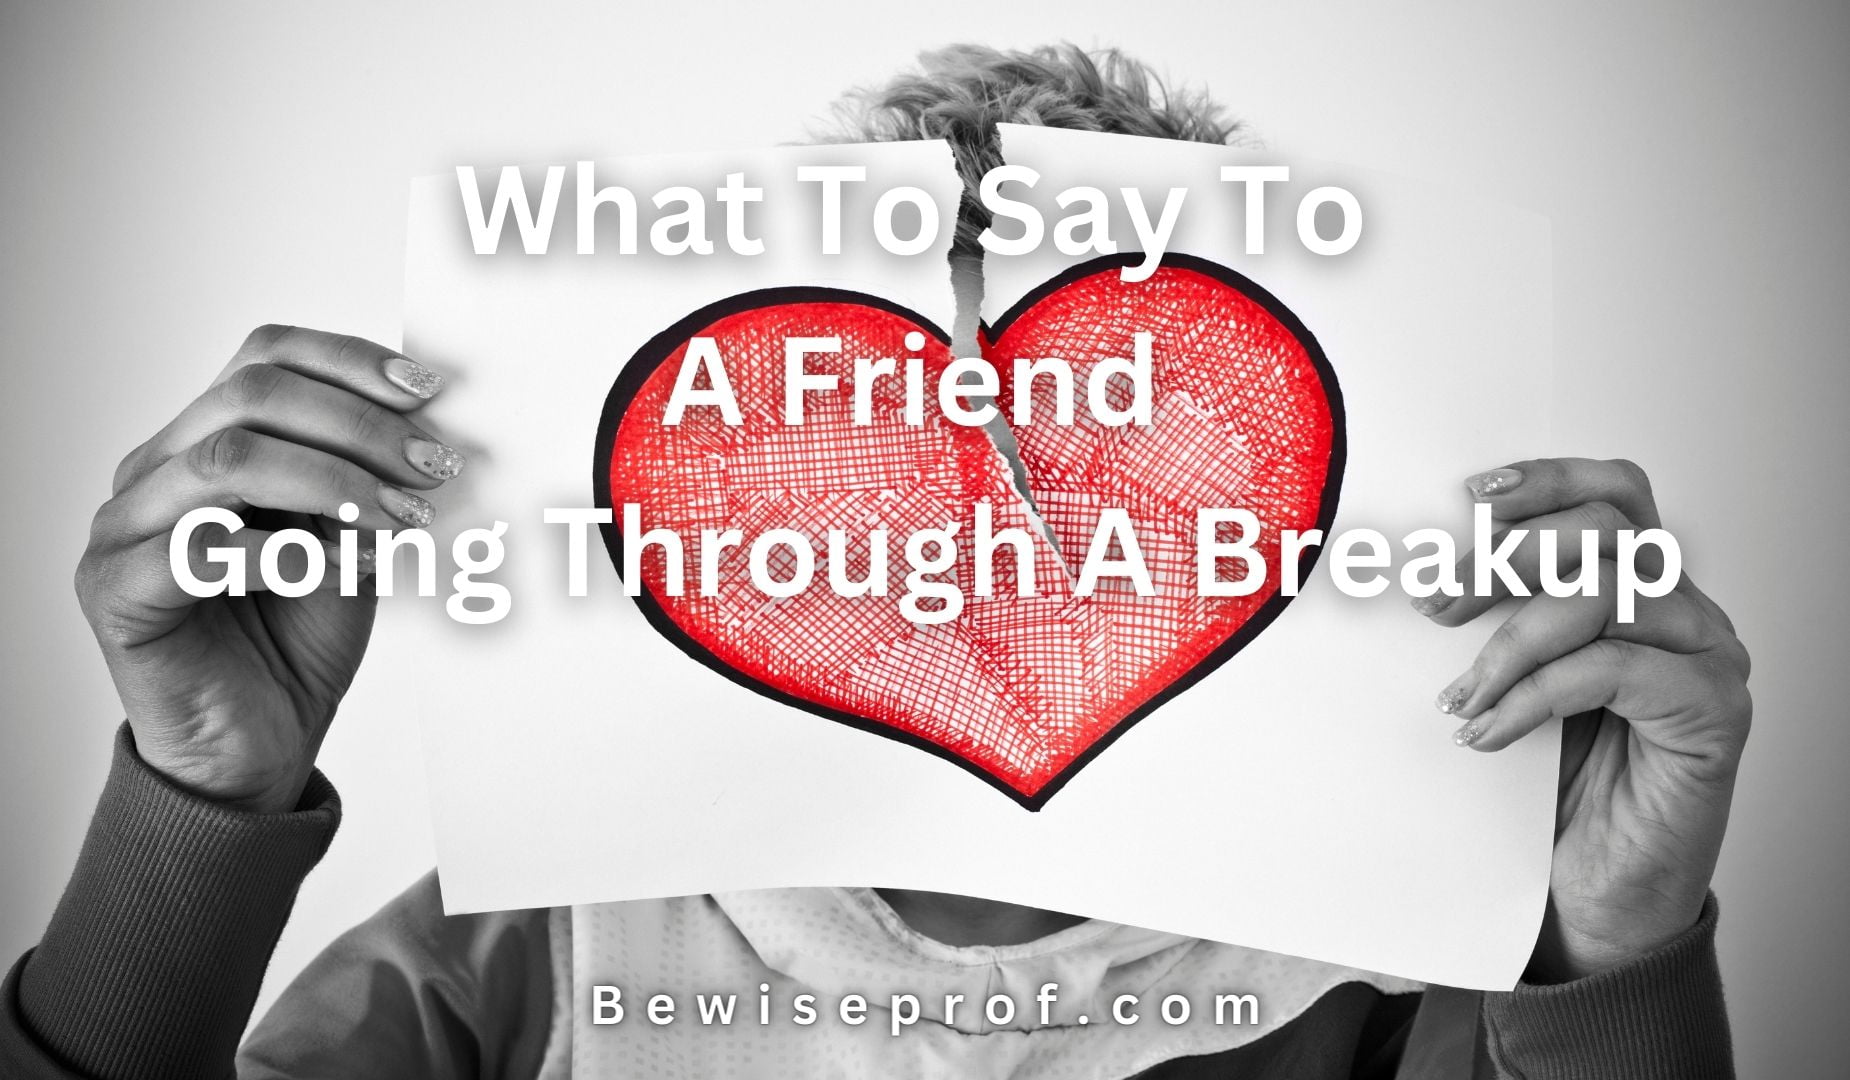 What To Say To A Friend Going Through A Breakup